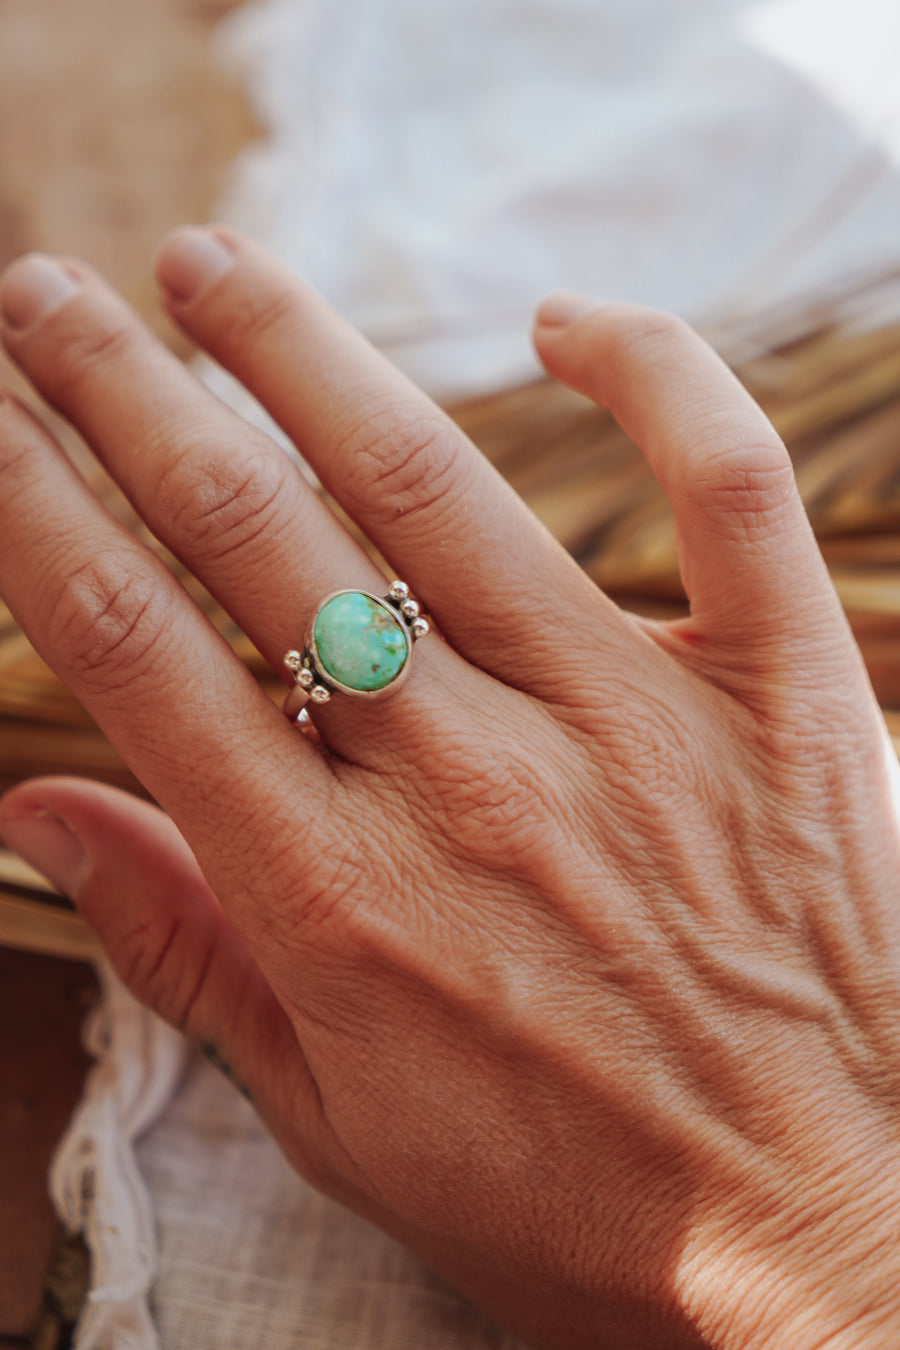 Ellipsis Ring in Sonoran Mountain Turquoise Size 9.5